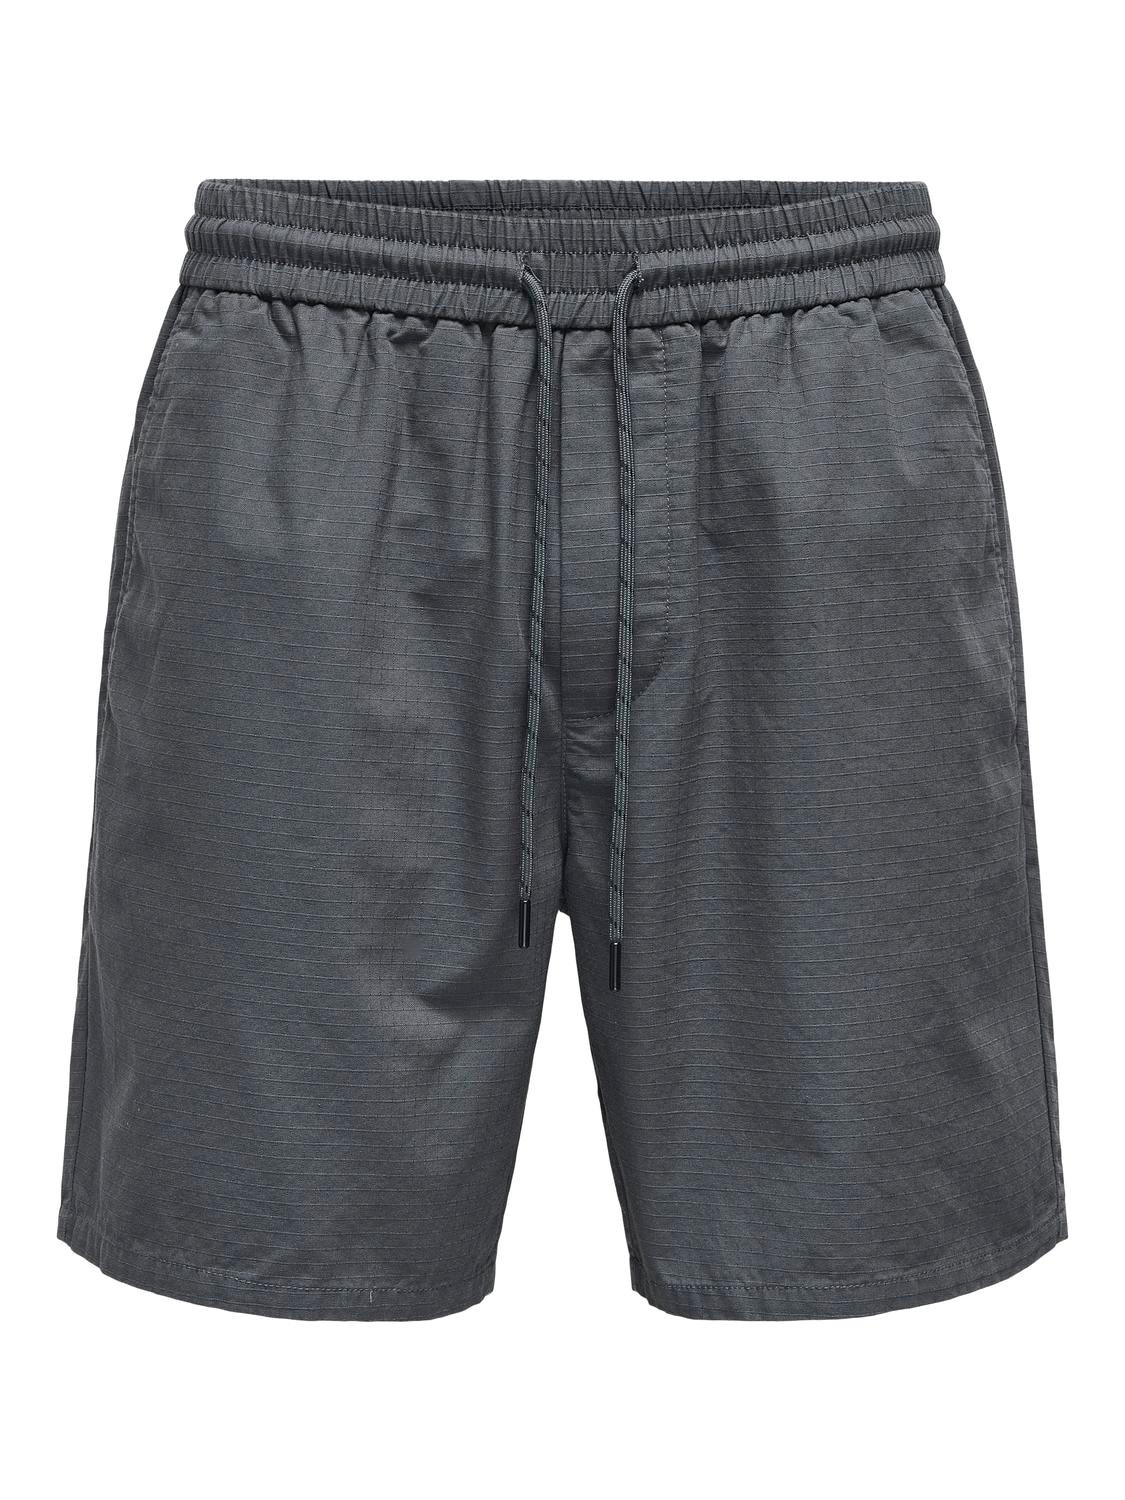 ONLY & SONS Shorts Regular Fit -Grey Pinstripe - 22029691